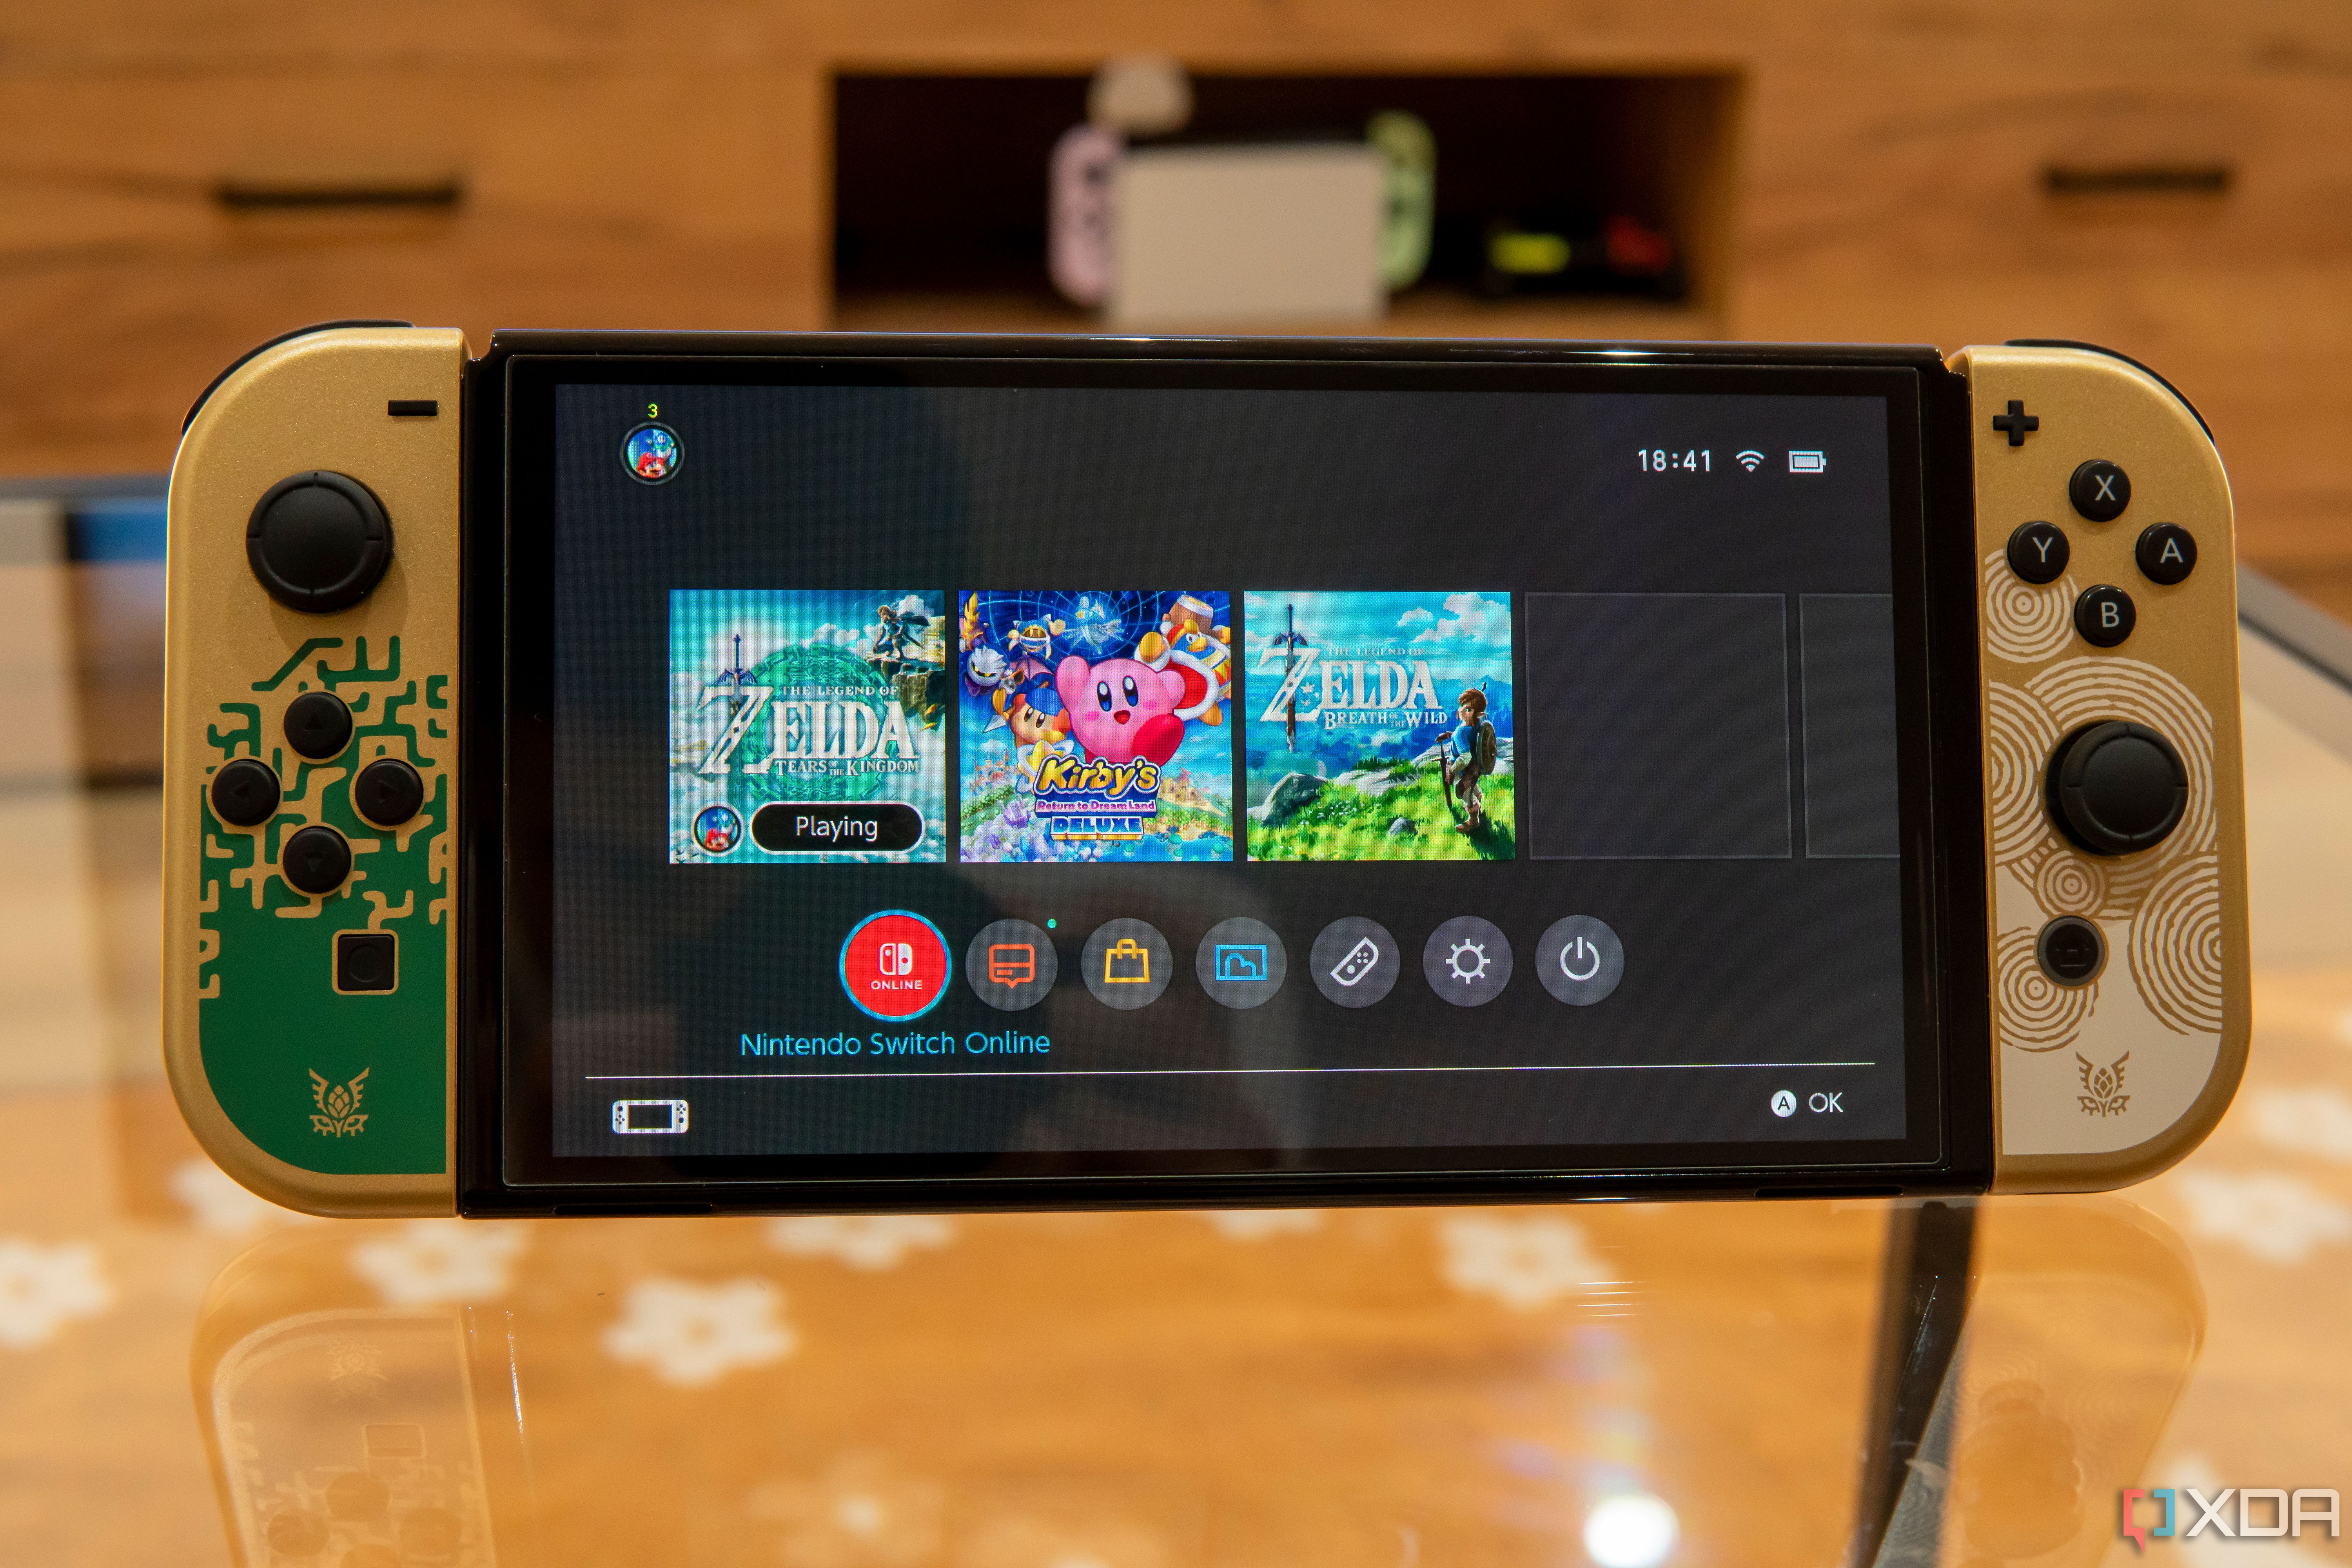 Front view of the Nintendo Switch OLED model displaying the Home menu with a game running in the background